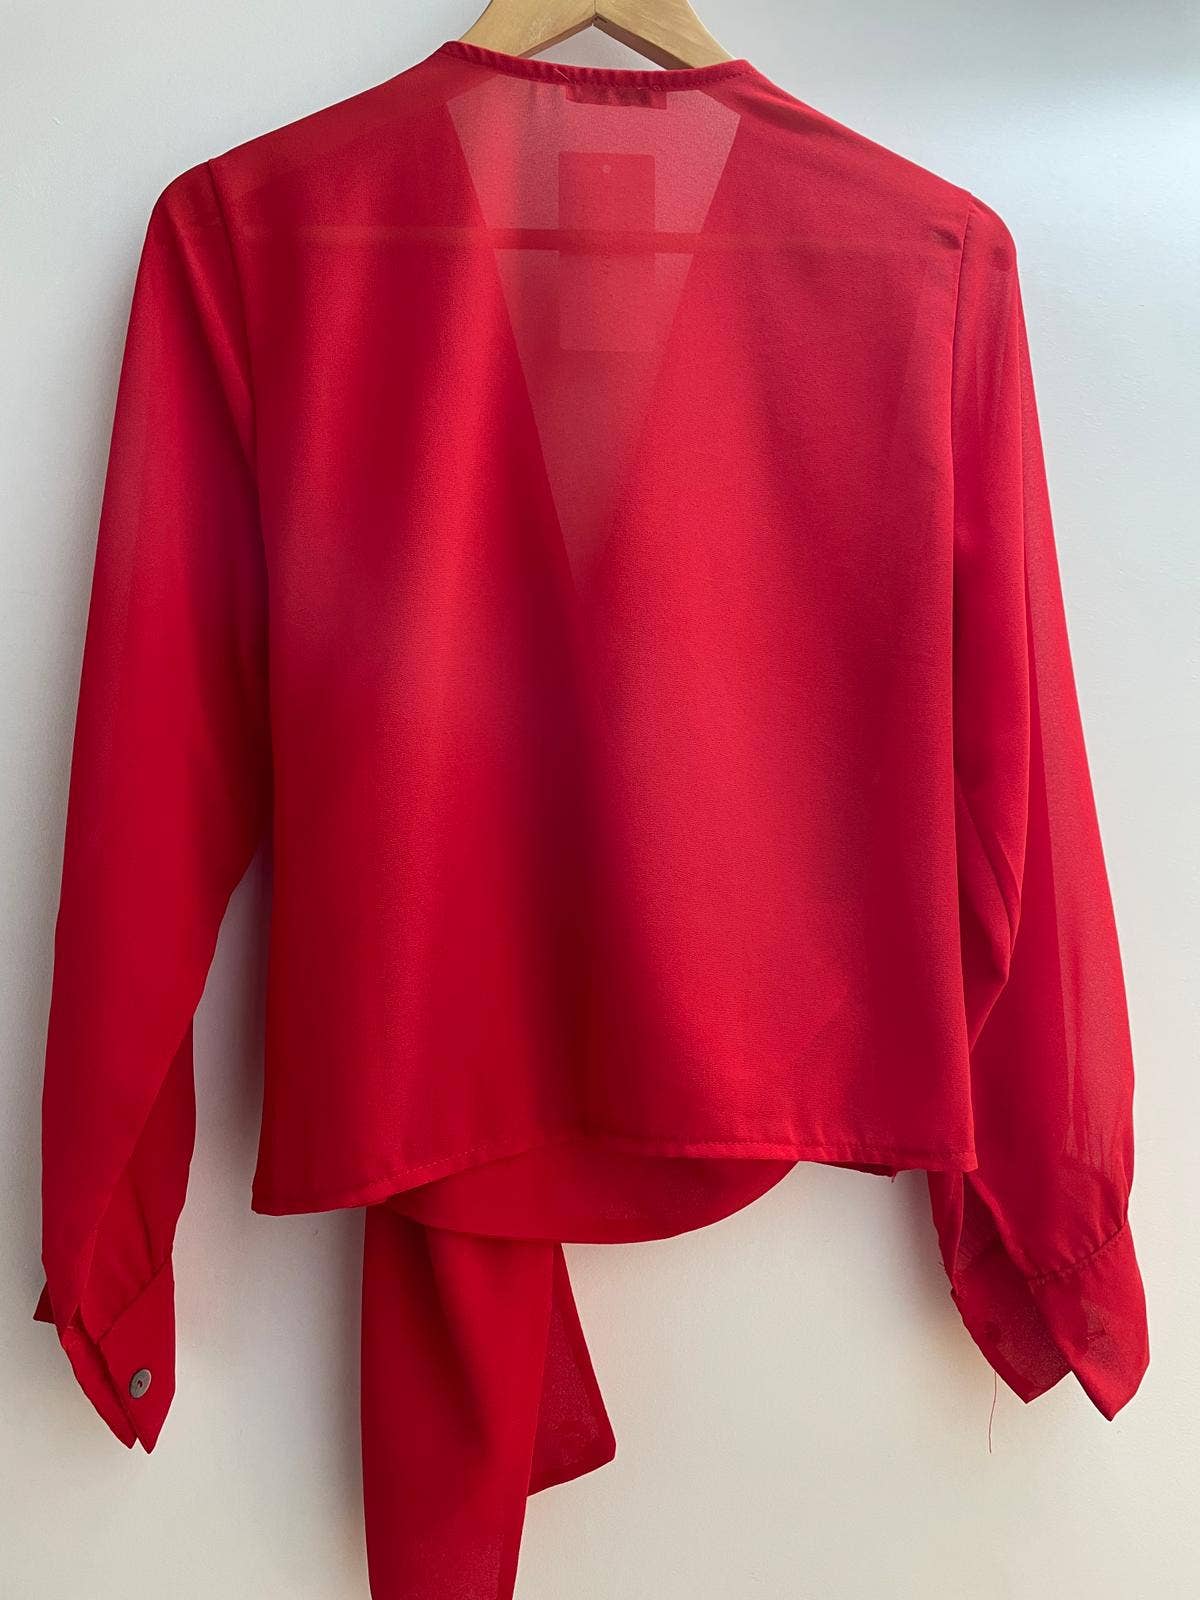 22015 blouses - Above The Crowd Boutique